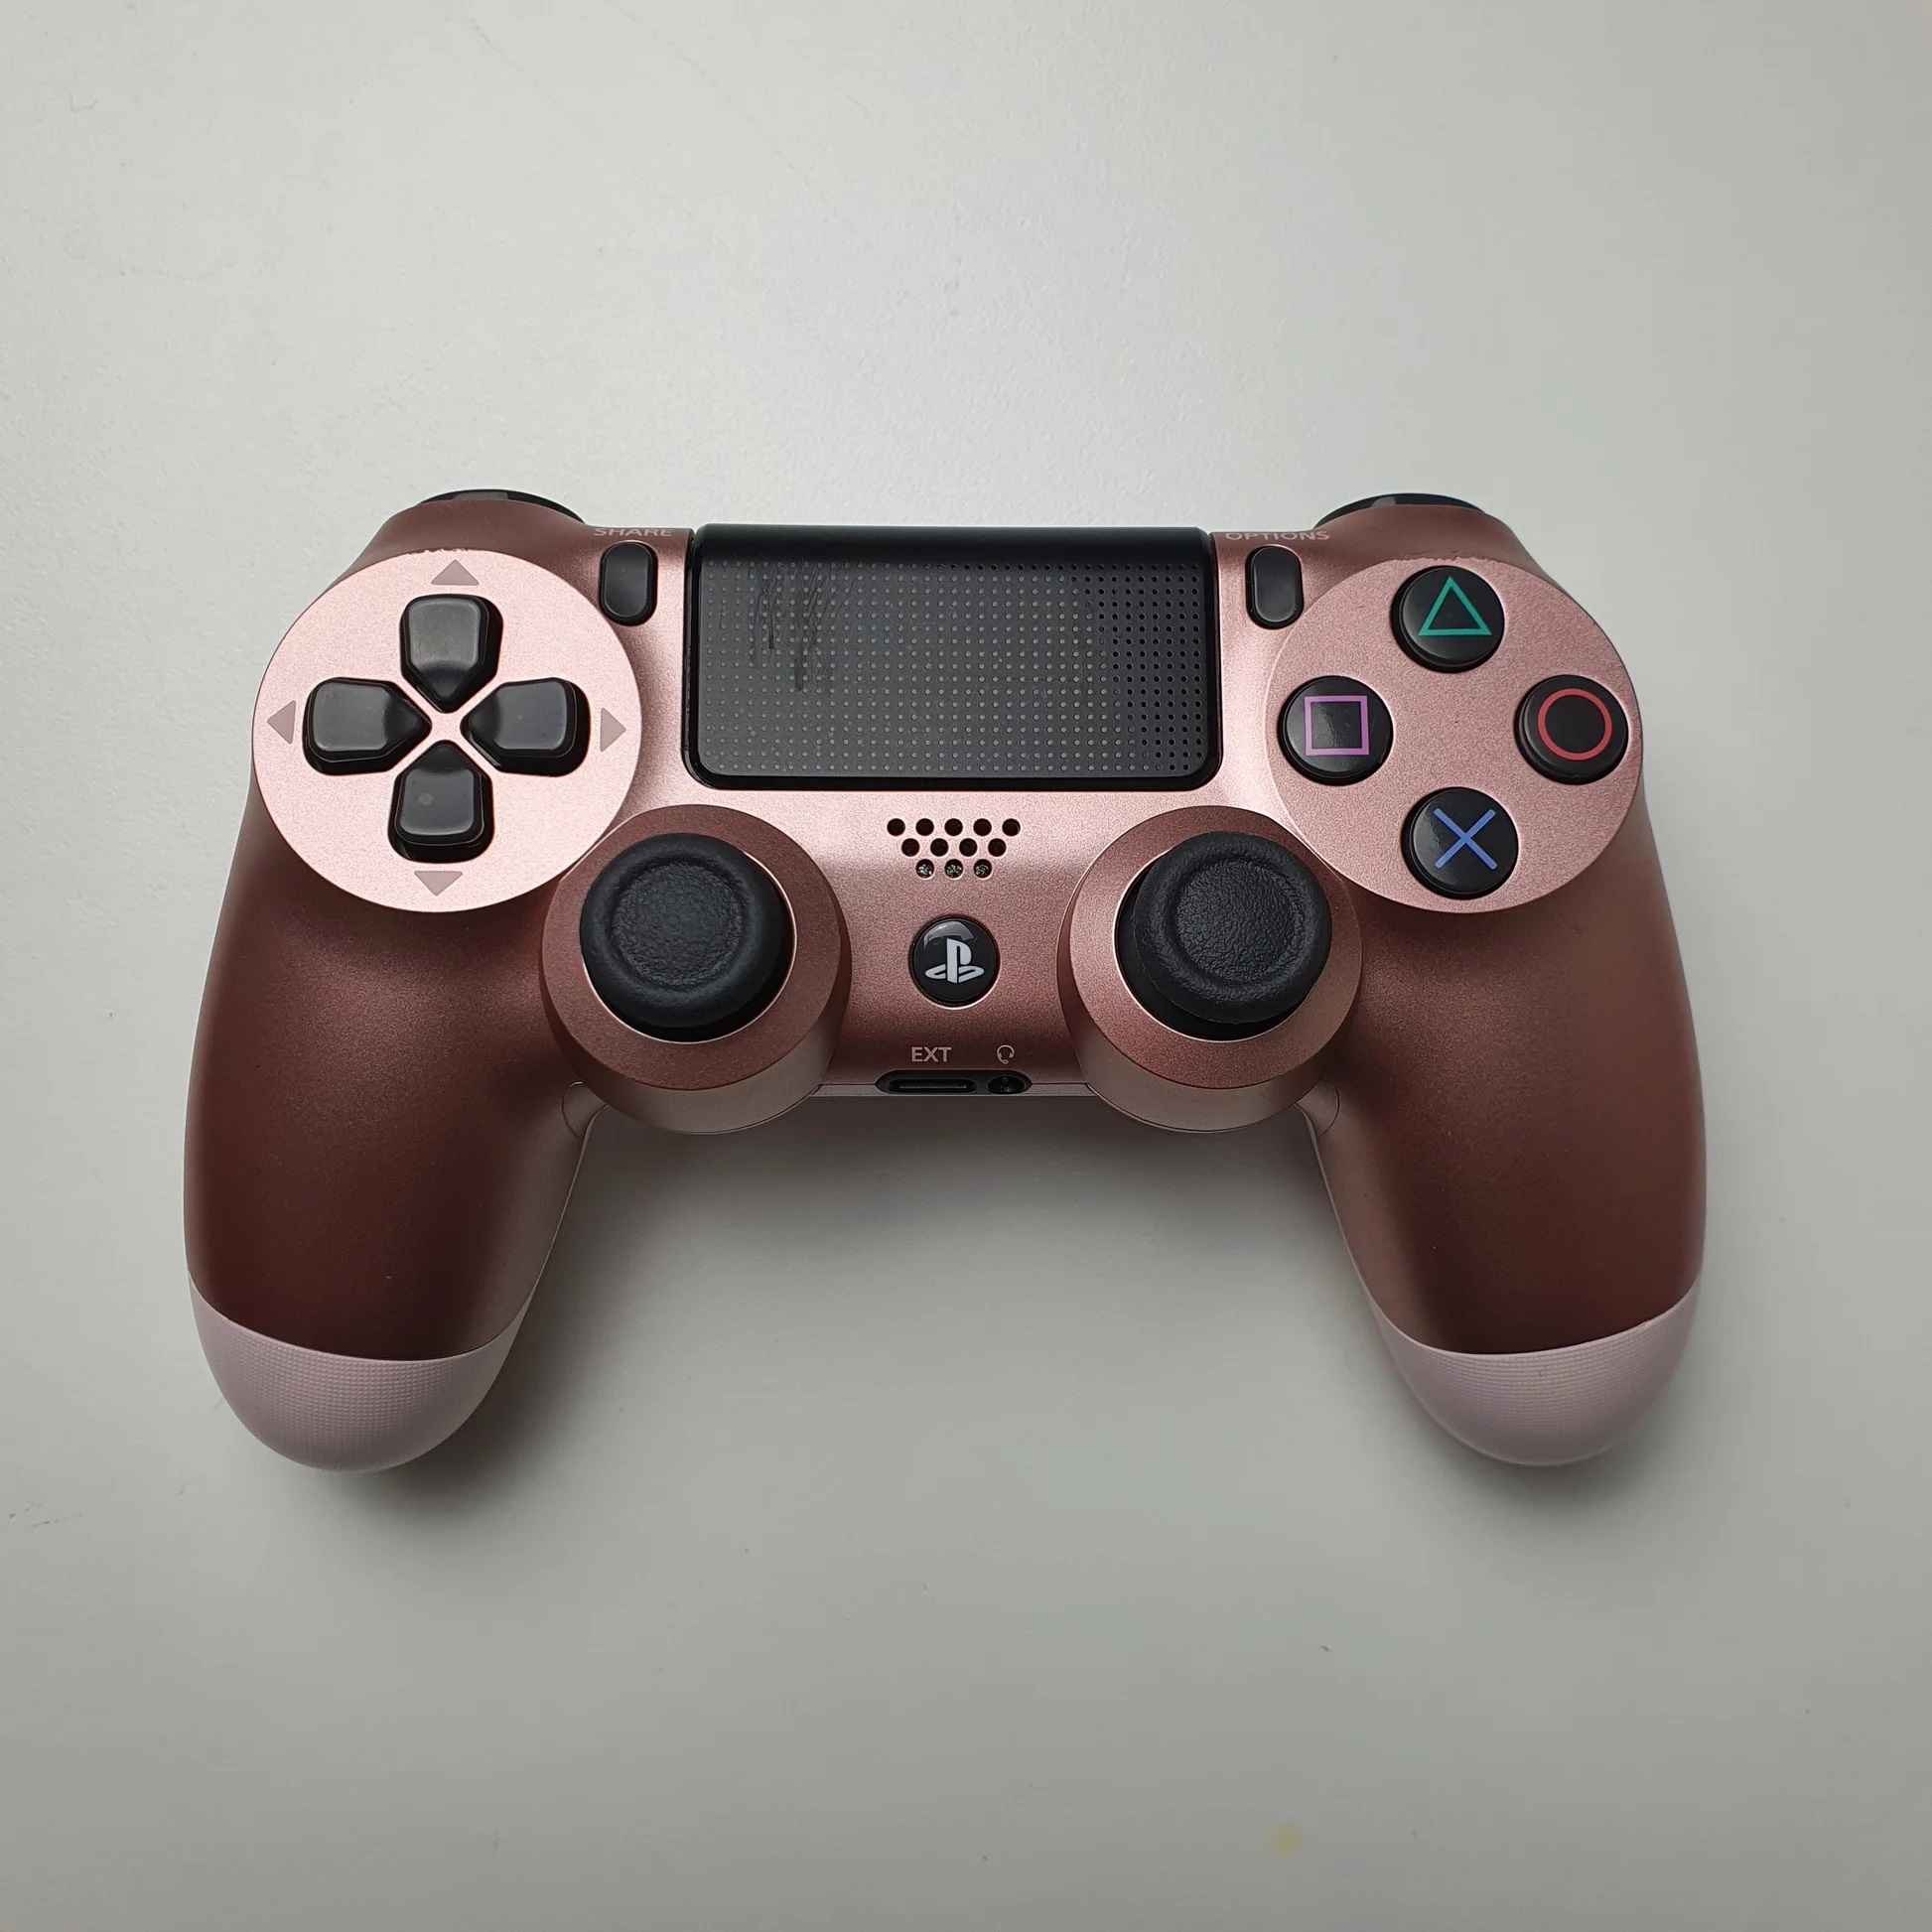 DualShock 4 Wireless Controller for PlayStation 4 – Rose Gold